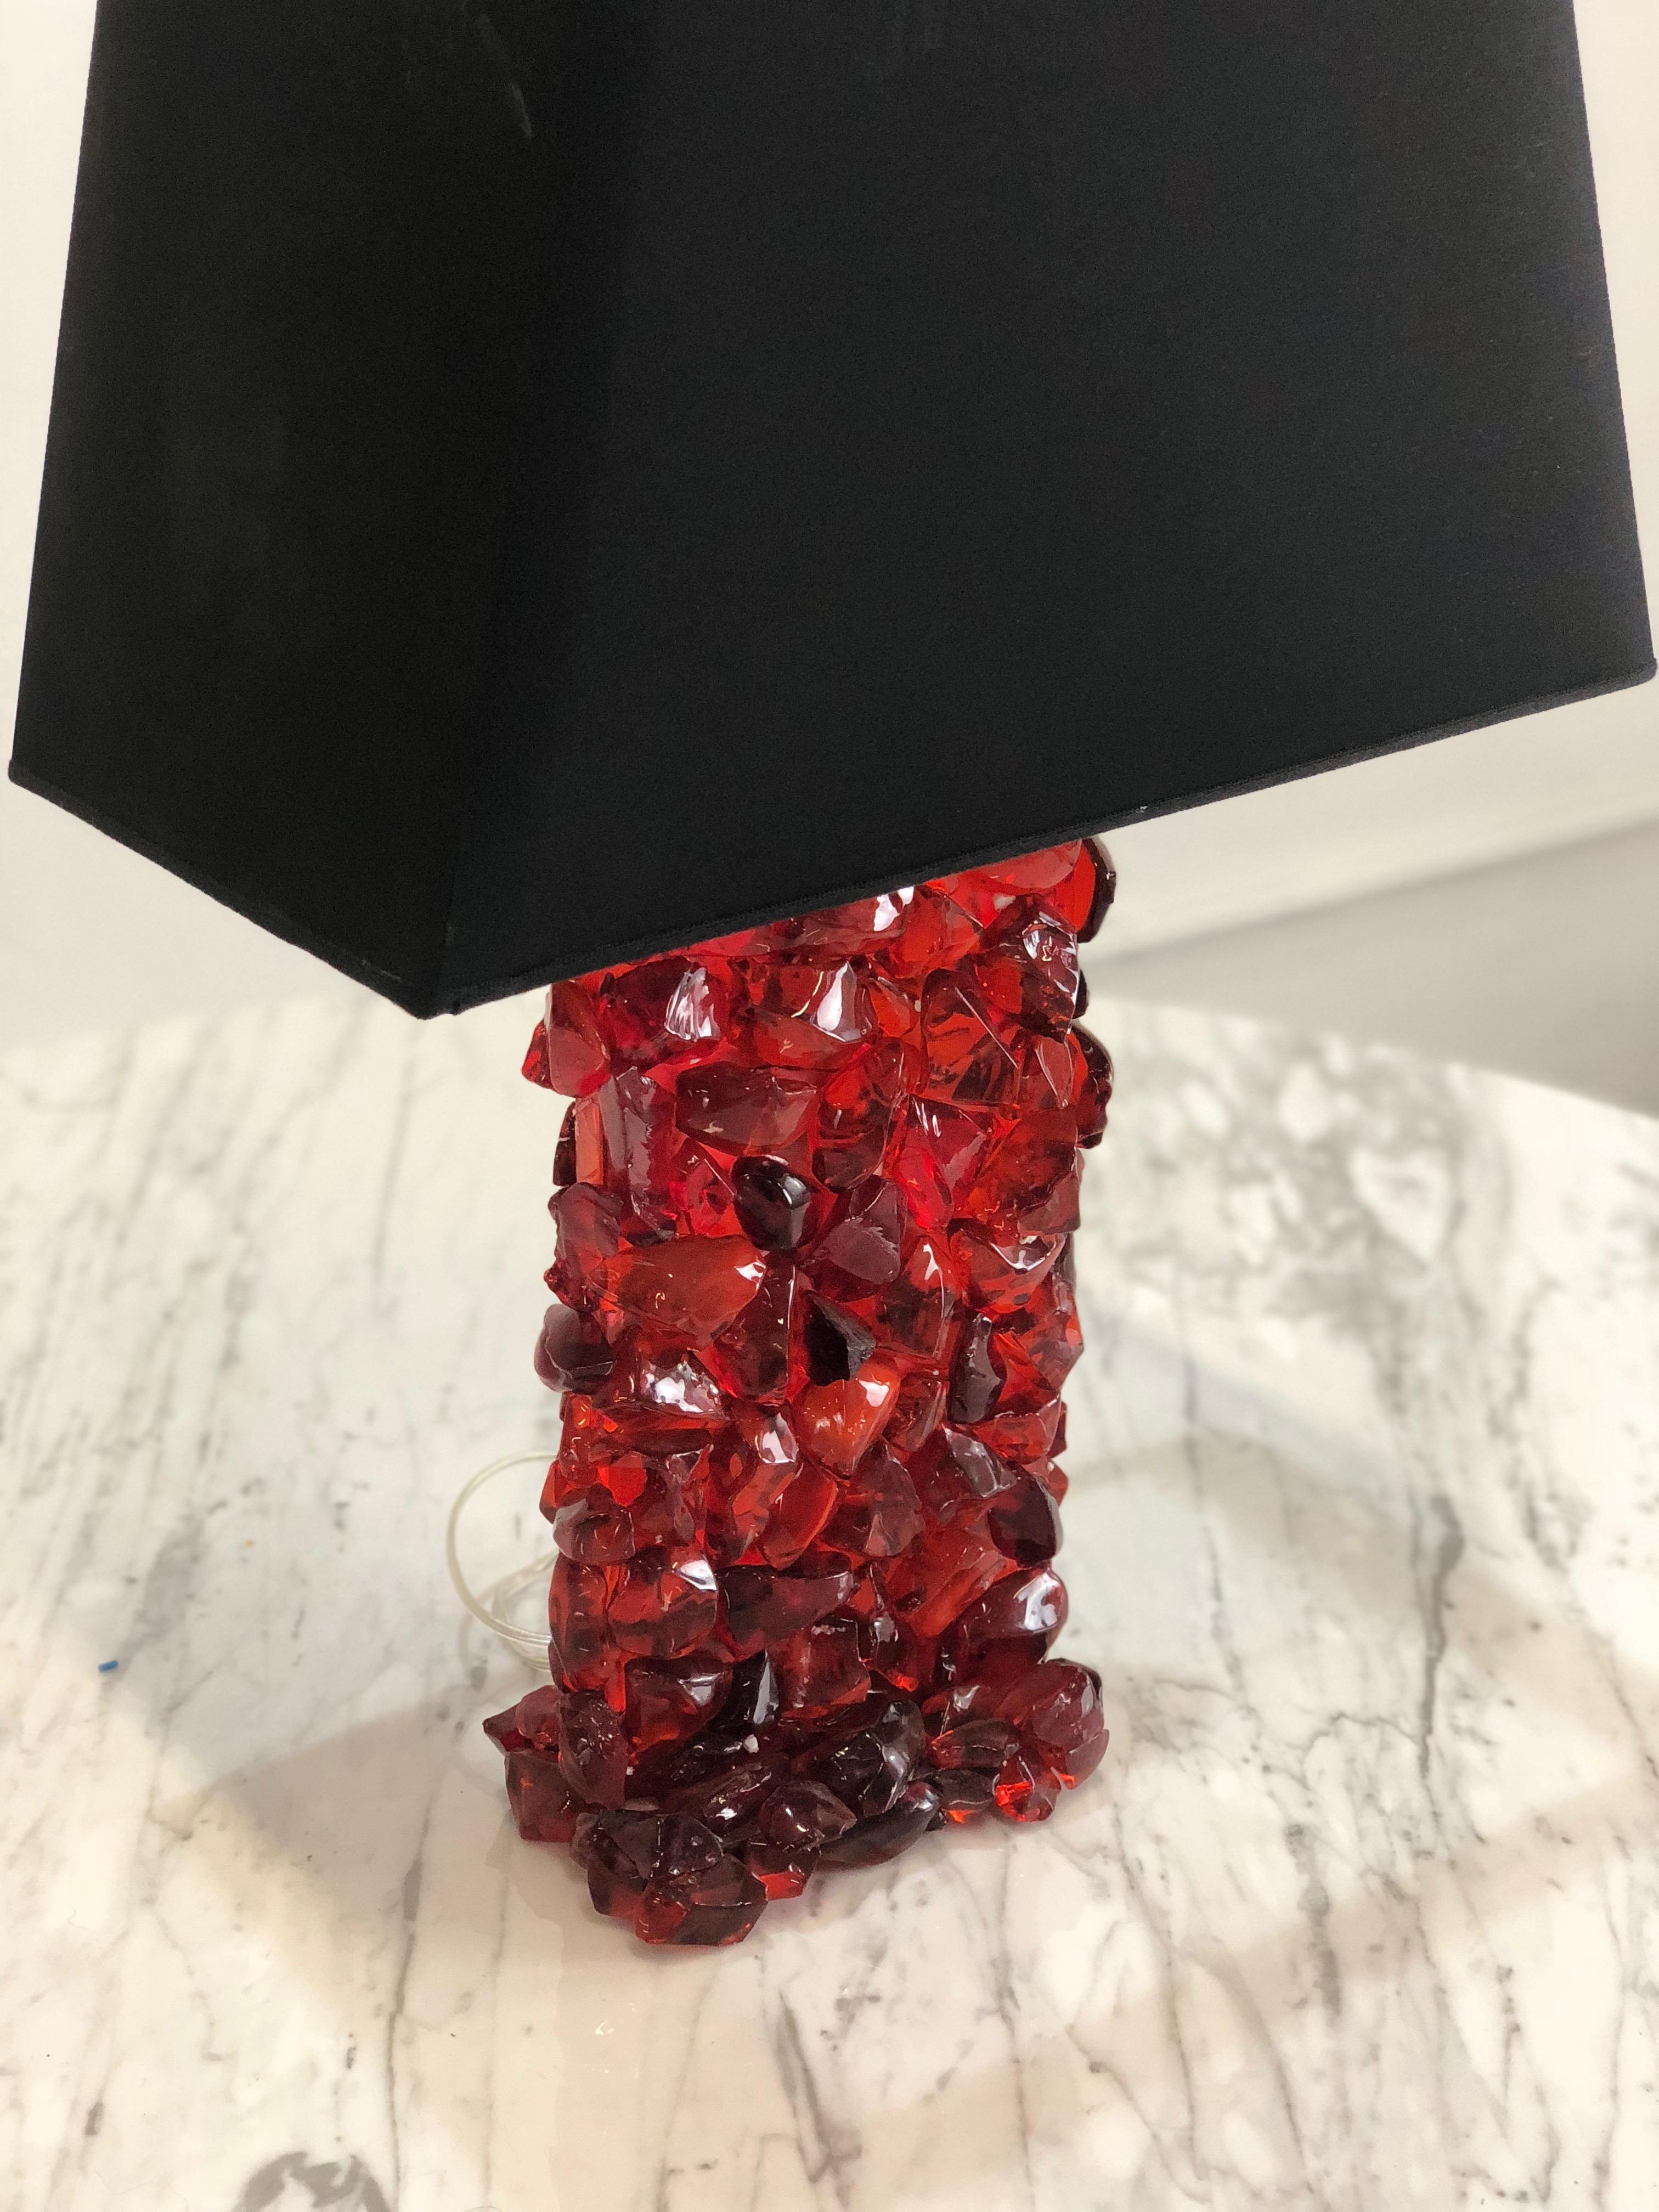 Mid-Century Modern Vintage Table Lamp with Red Glass Base